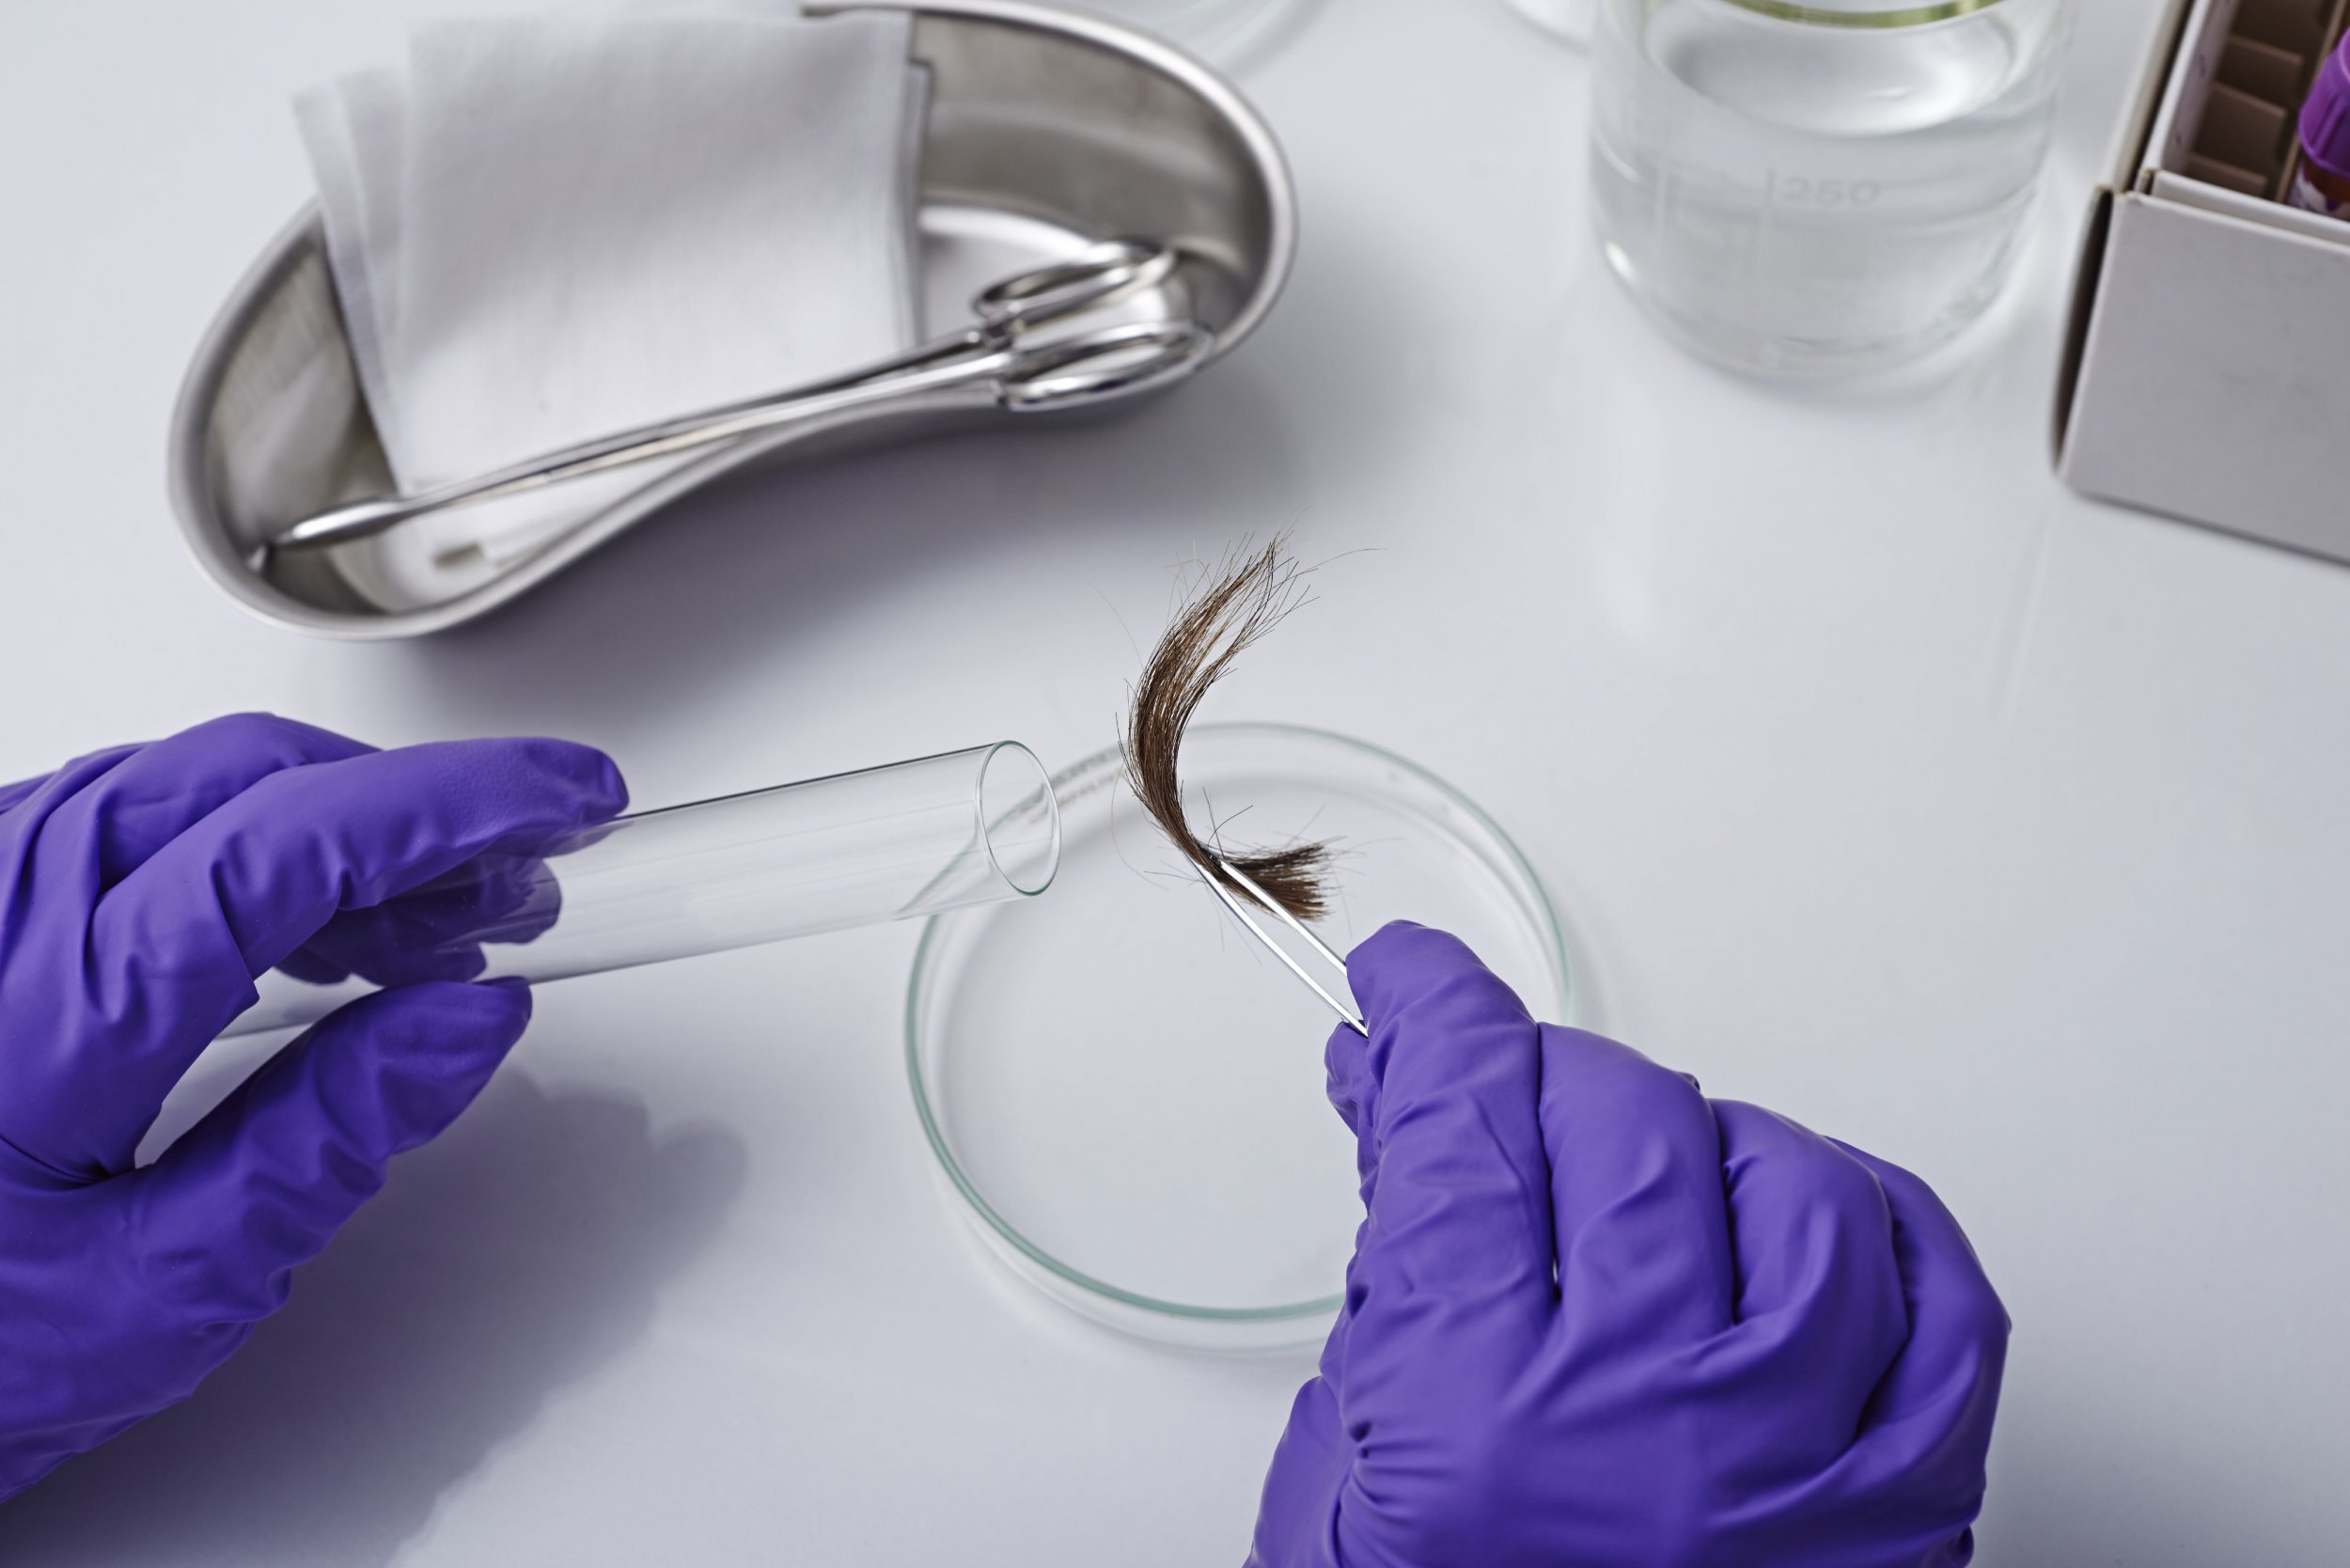 Hair Analysis Could Become an Important Alternative to DNA Testing